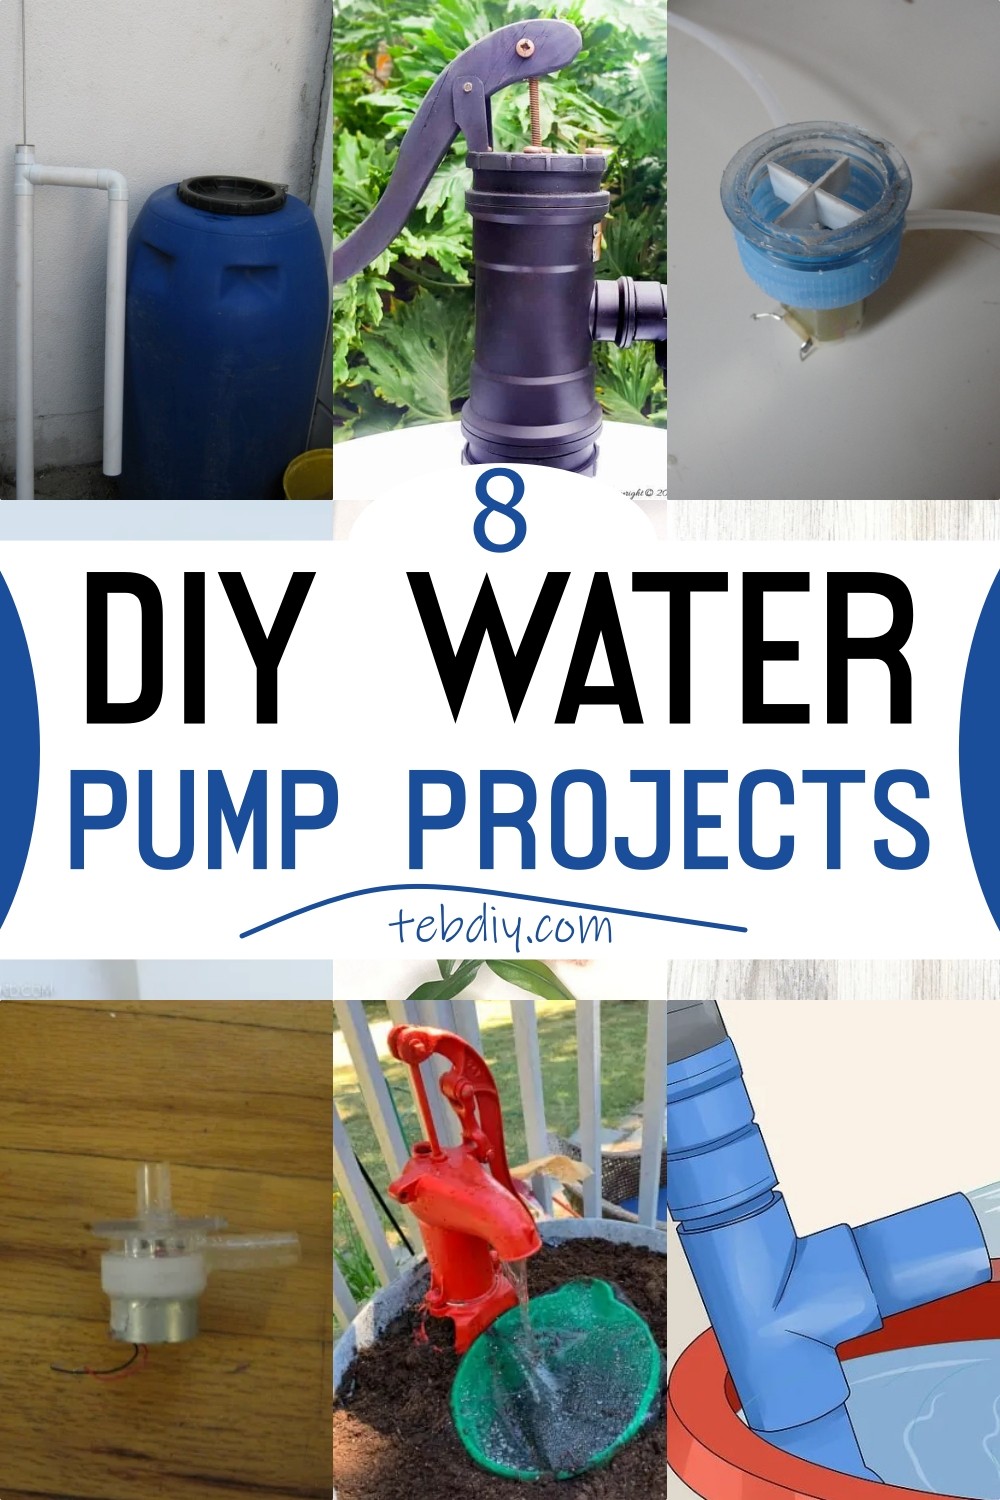 DIY Water Pump Projects